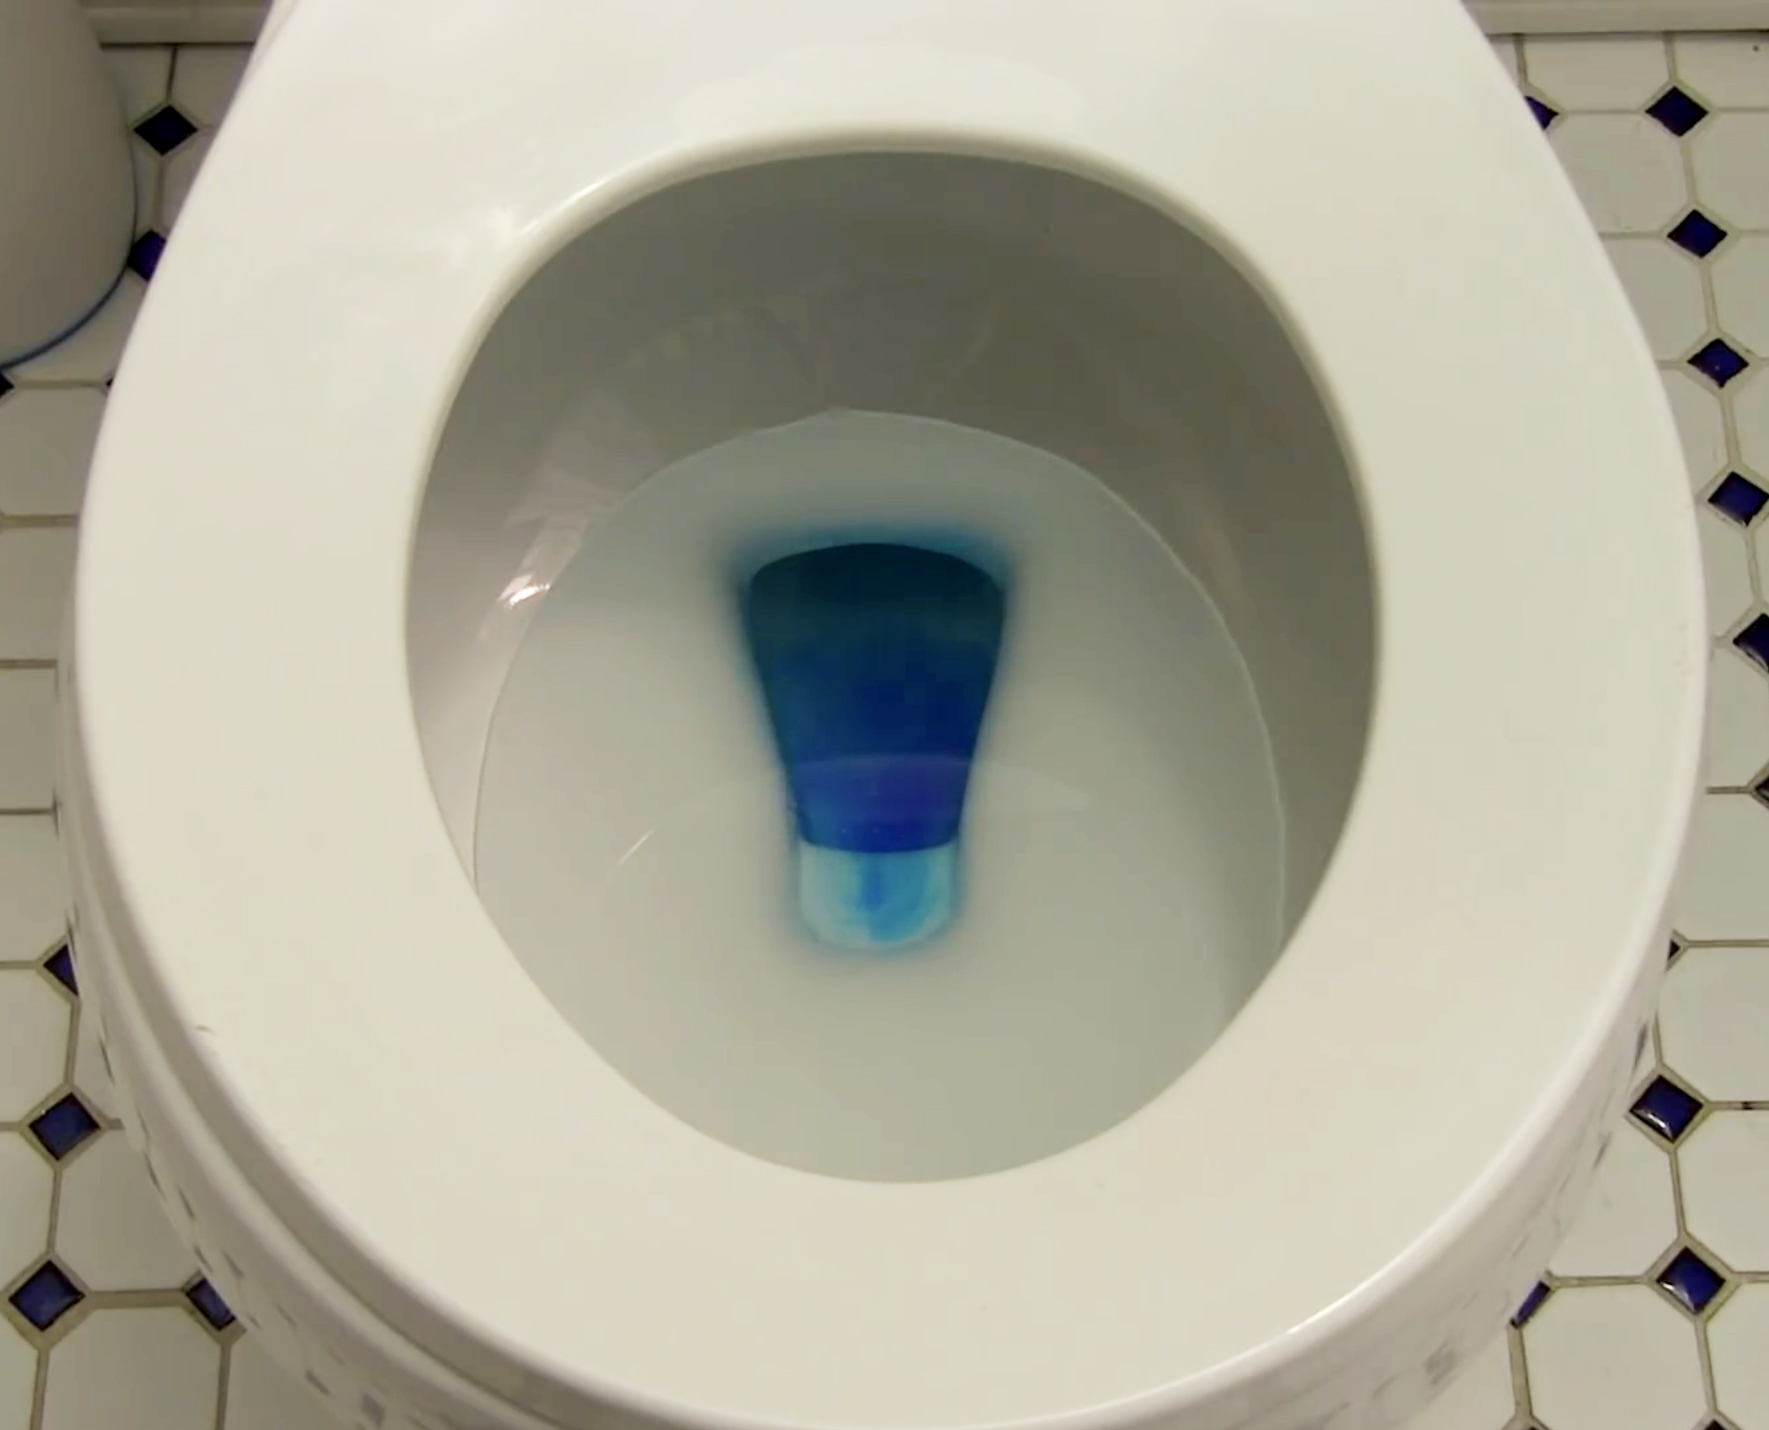 Toilet with blue dye in the bowl